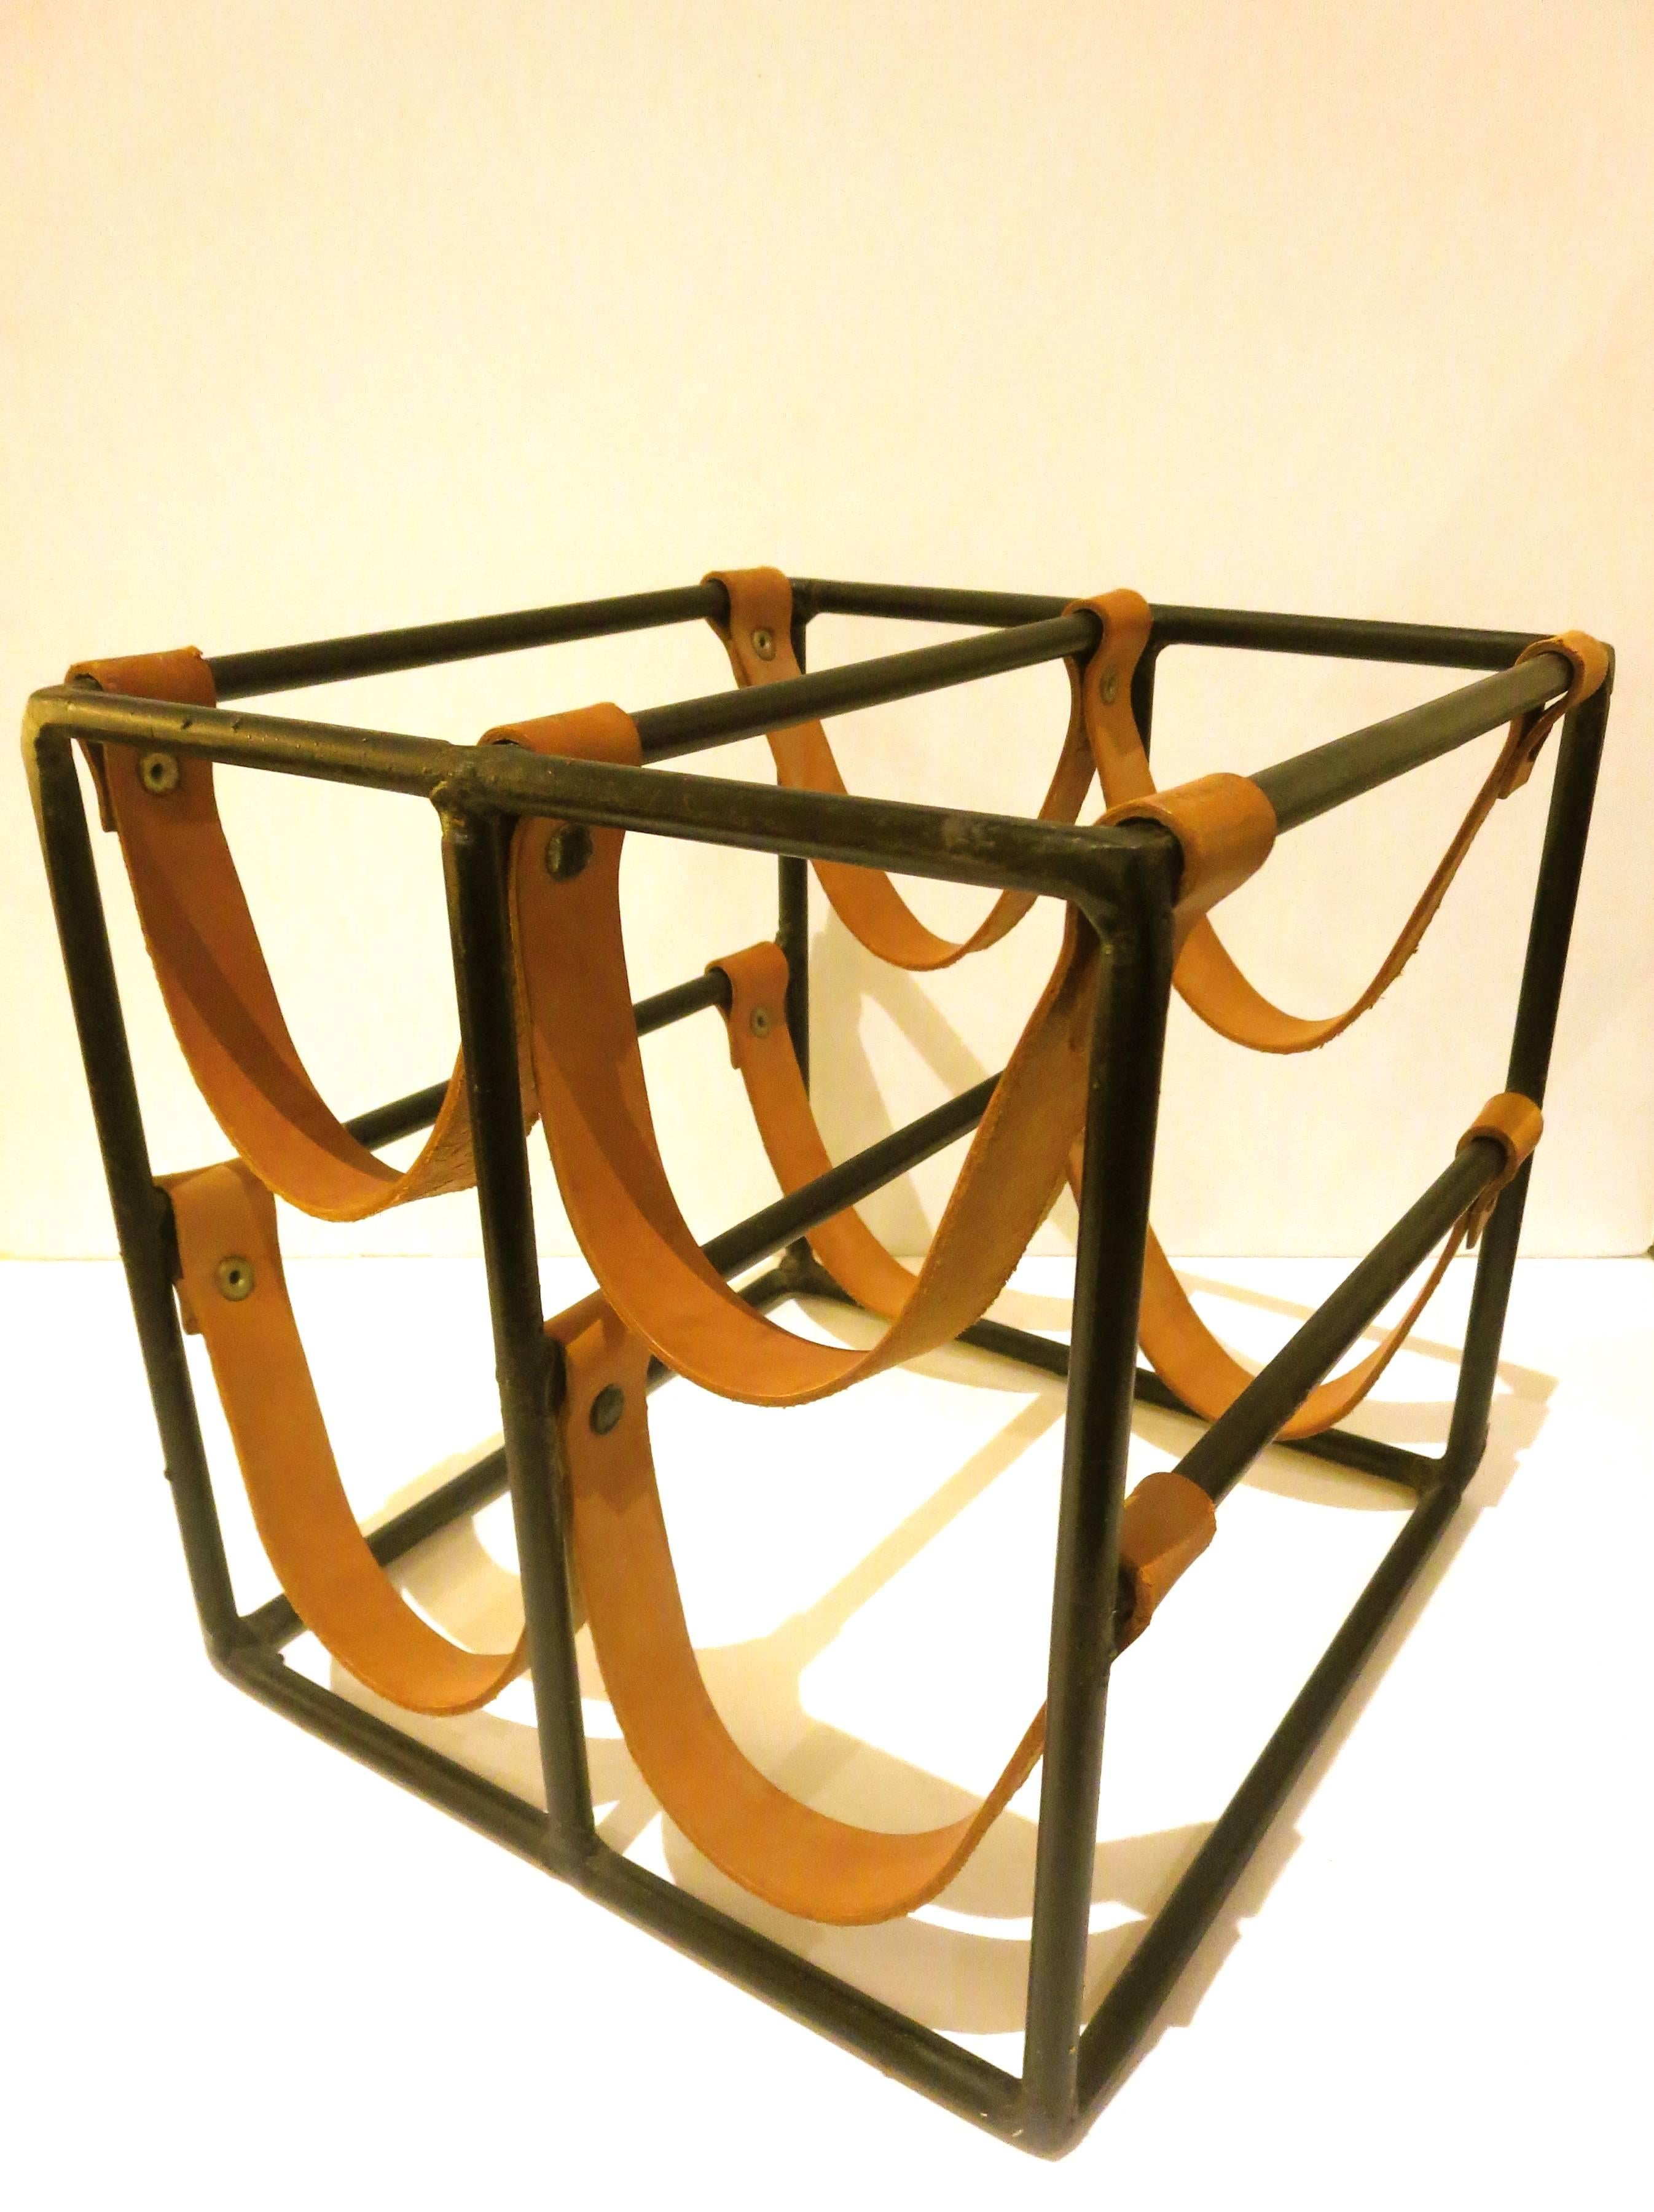 Simple and elegant design in this 1950s wine rack four bottle capacity, designed by Arthur Umanoff, leather straps holds each bottle nice design clean.